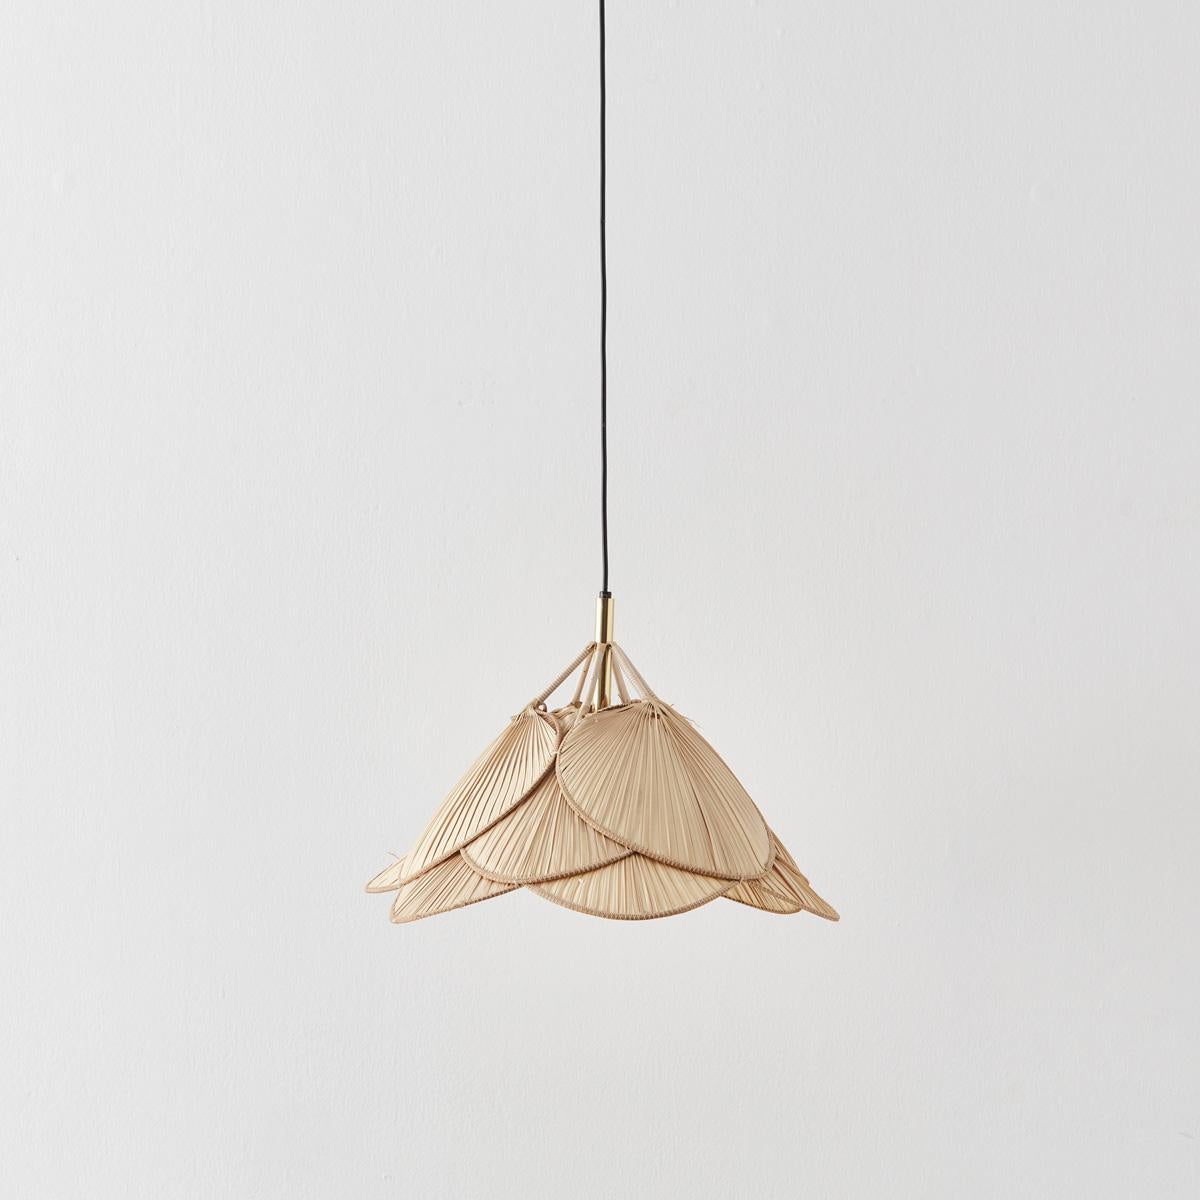 Known as a ‘poet of light’, Munich-based Ingo Maurer was at the forefront of lighting innovations, blending form and function in his often whimsical designs. This delicate bamboo pendant is part of his Uchiwa series, borrowing from traditional